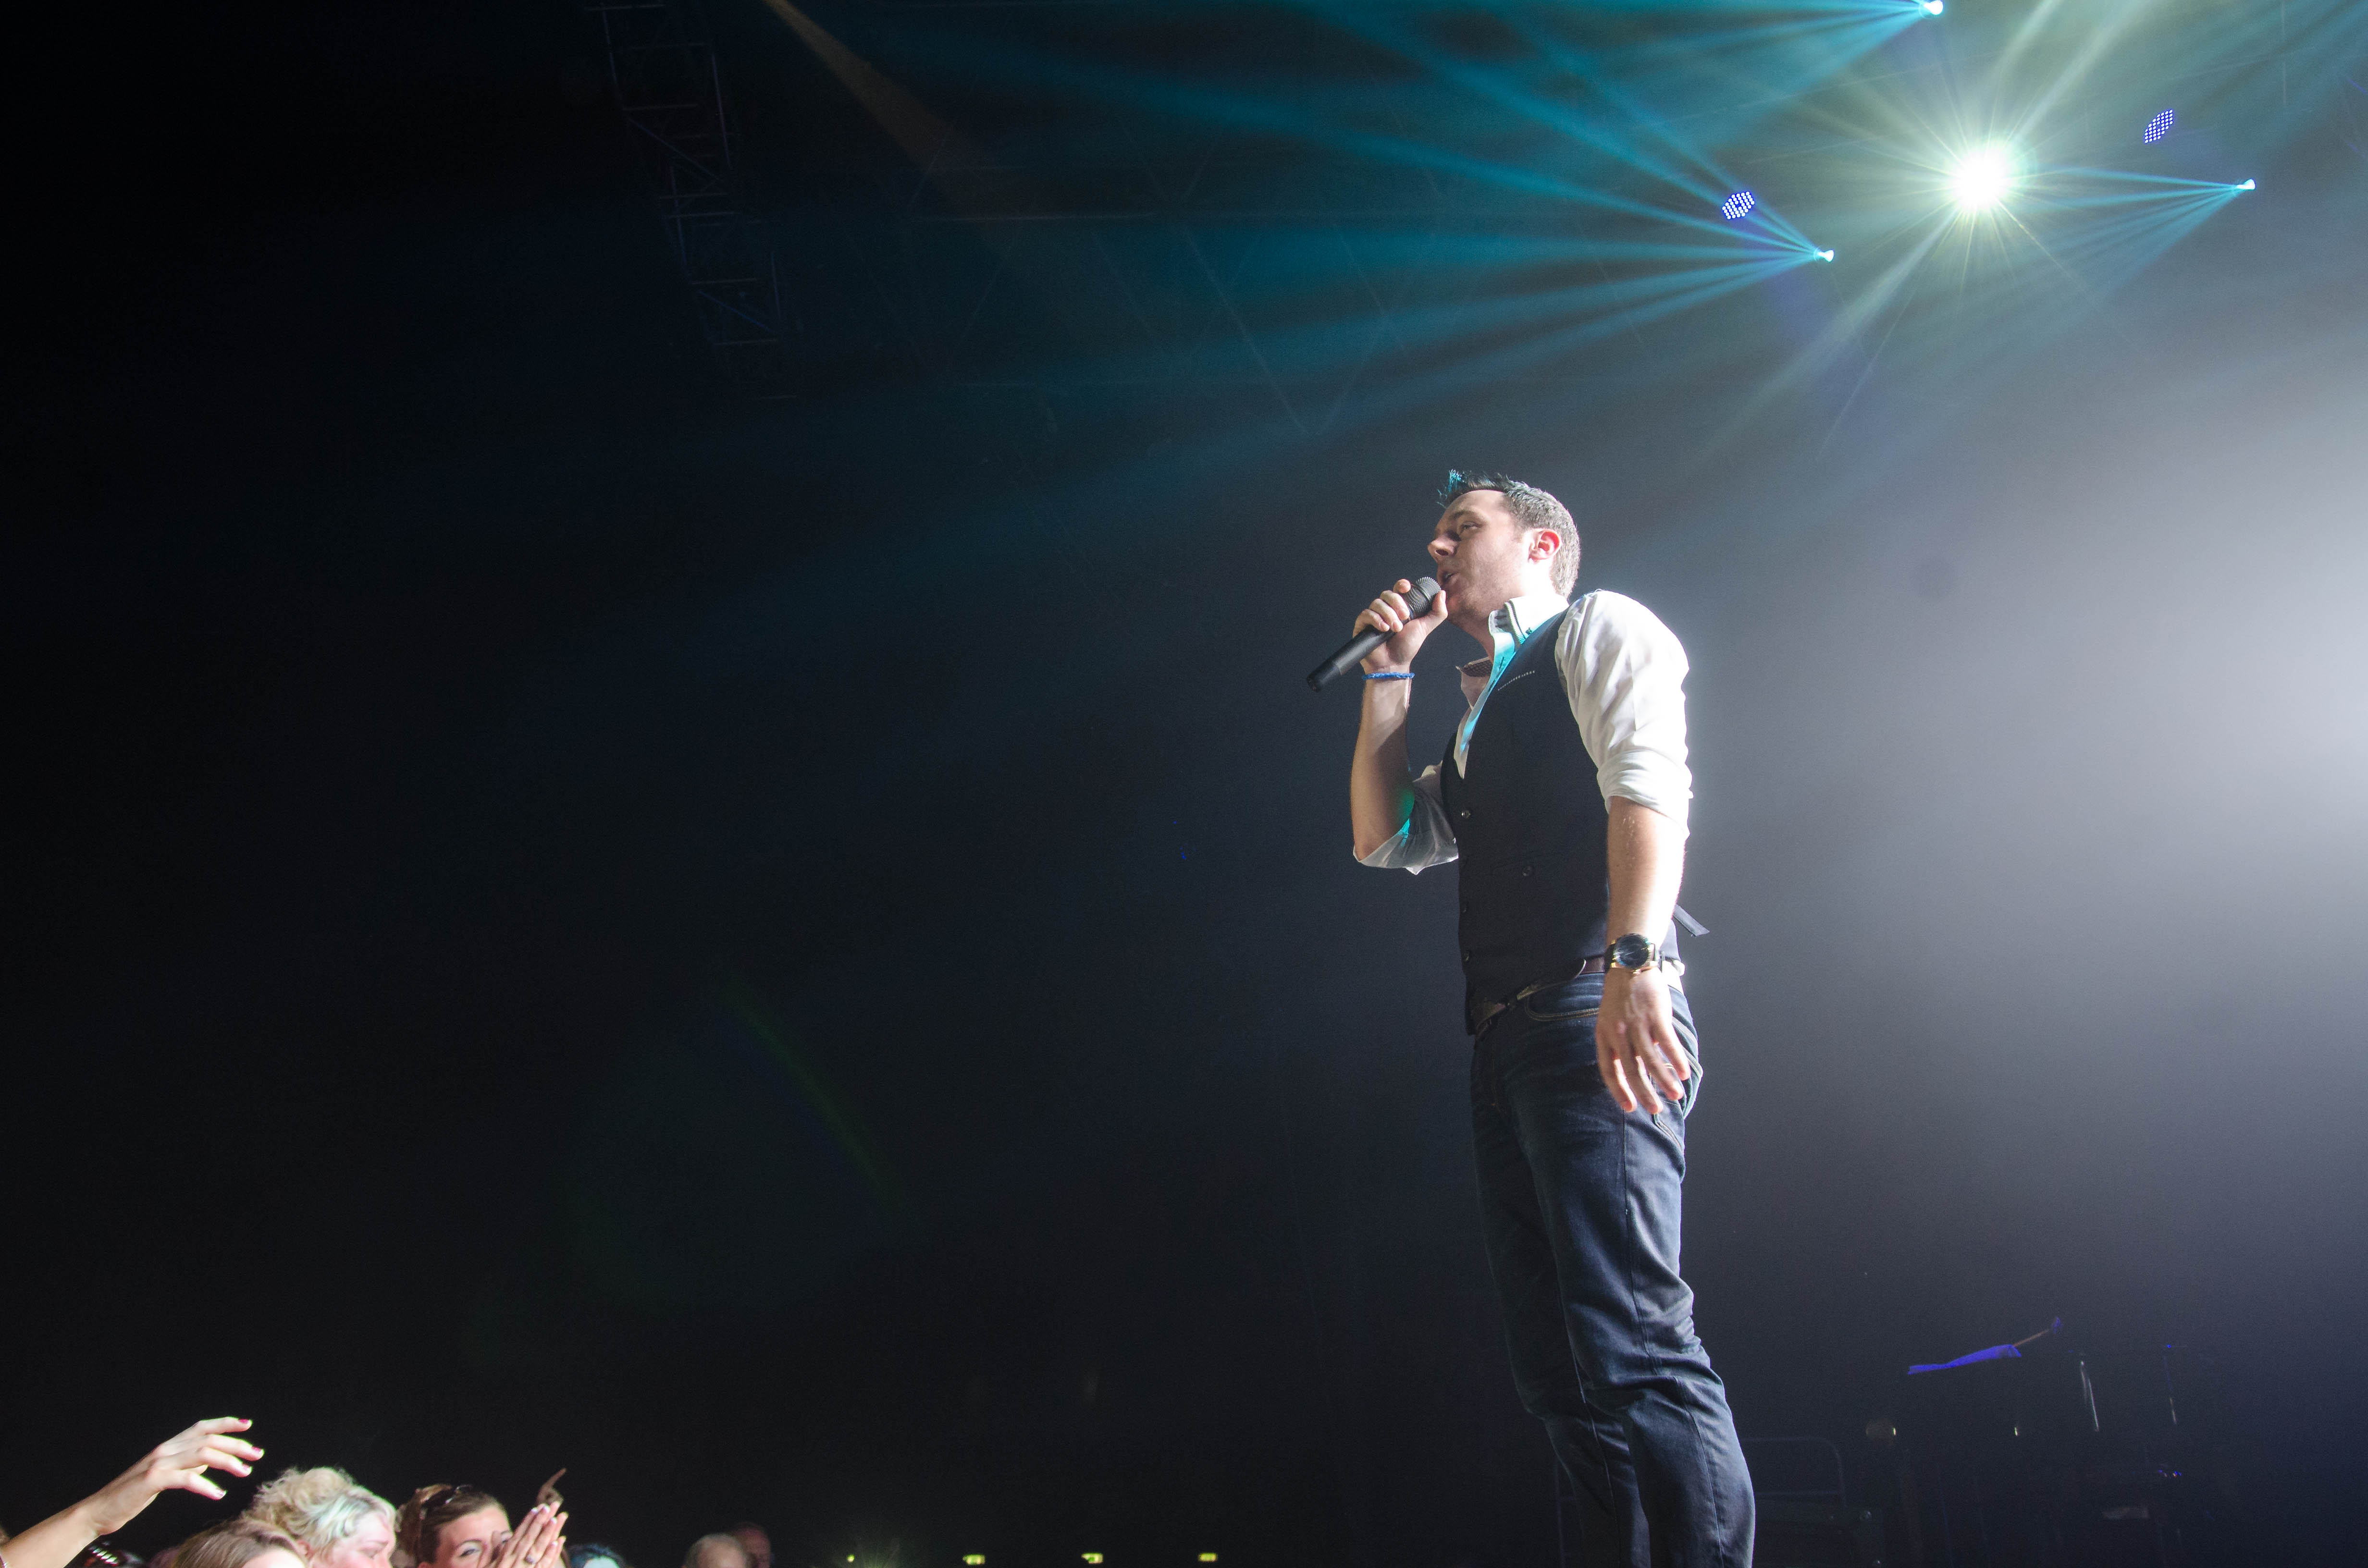 nathan-carter-at-the-marquee-cork-by-sean-smyth-15-6-14-40-of-55